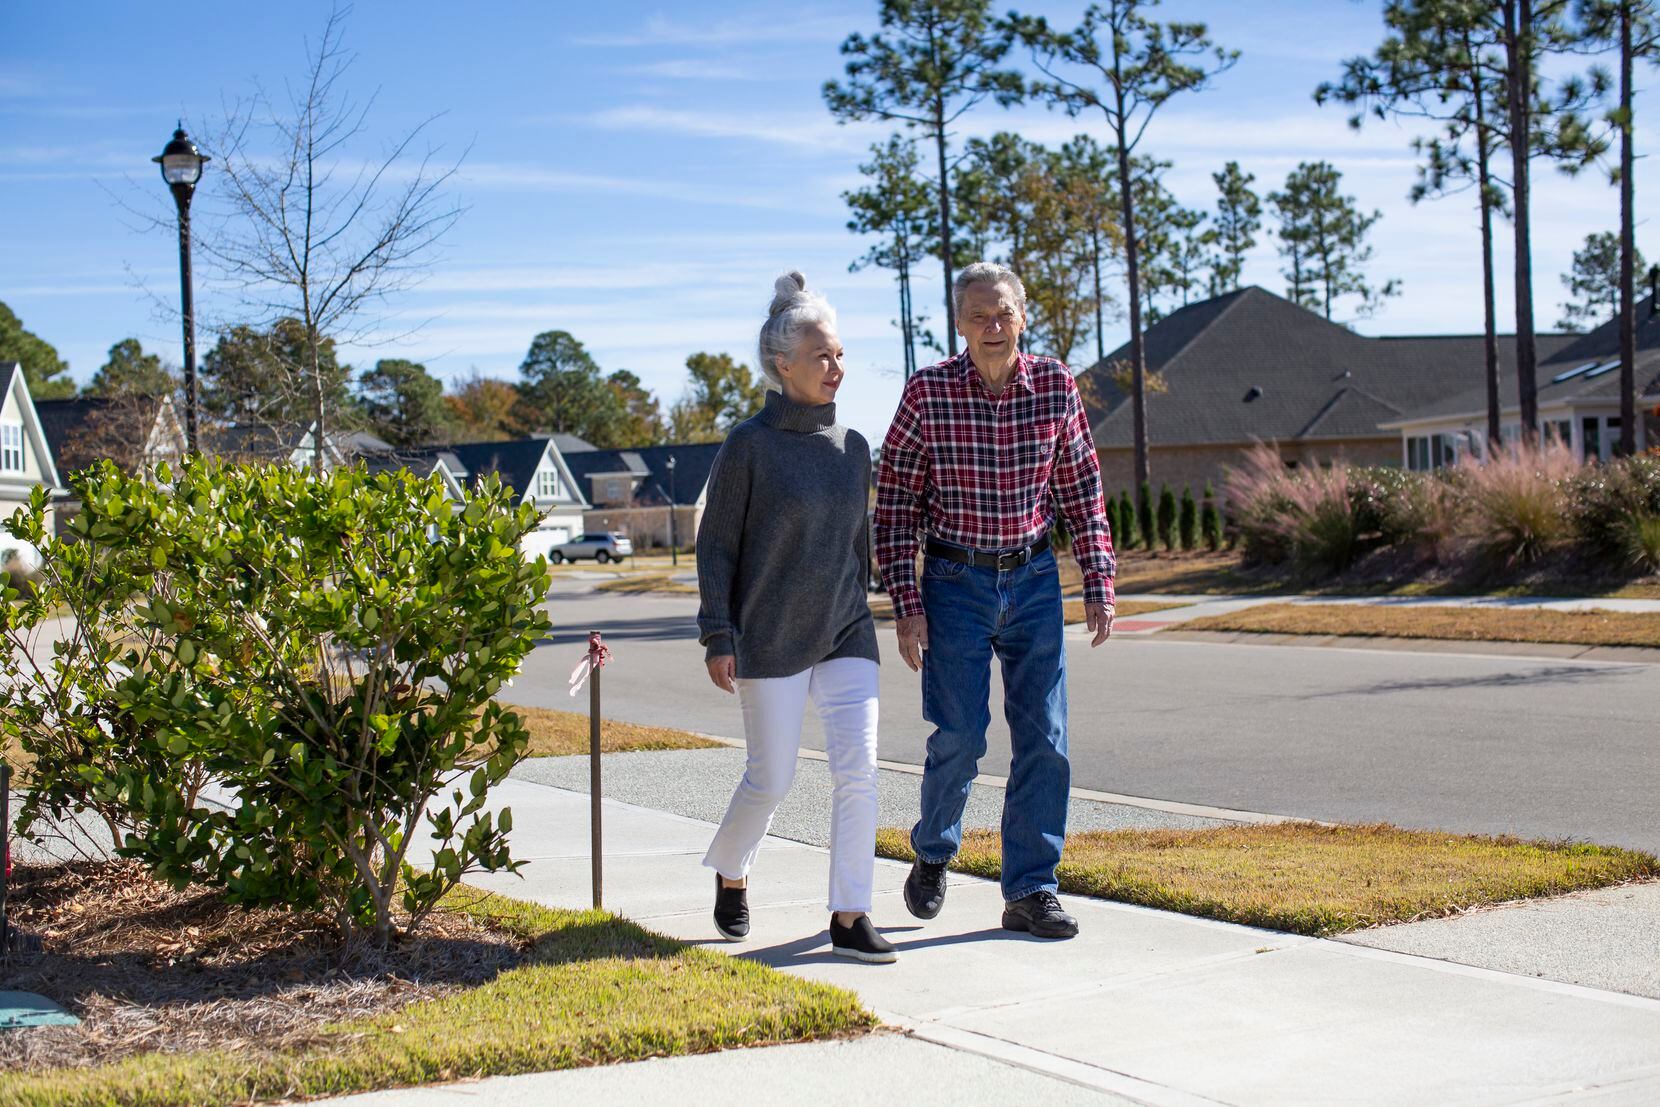 Linda Rounds (left) and her birth father, Gilbert Potyandy, go for a walk near Rounds' half sister's house in Wilmington, N.C., on Thanksgiving Day, Thursday, November 25, 2021. Rounds connected with her birth father while she was helping other Korean adoptees to find their birth families. She and her extended family, including her two half sisters, Gilbert, and his wife, Donna Potyandy, met in Wilmington to celebrate Thanksgiving all together for the first time. 